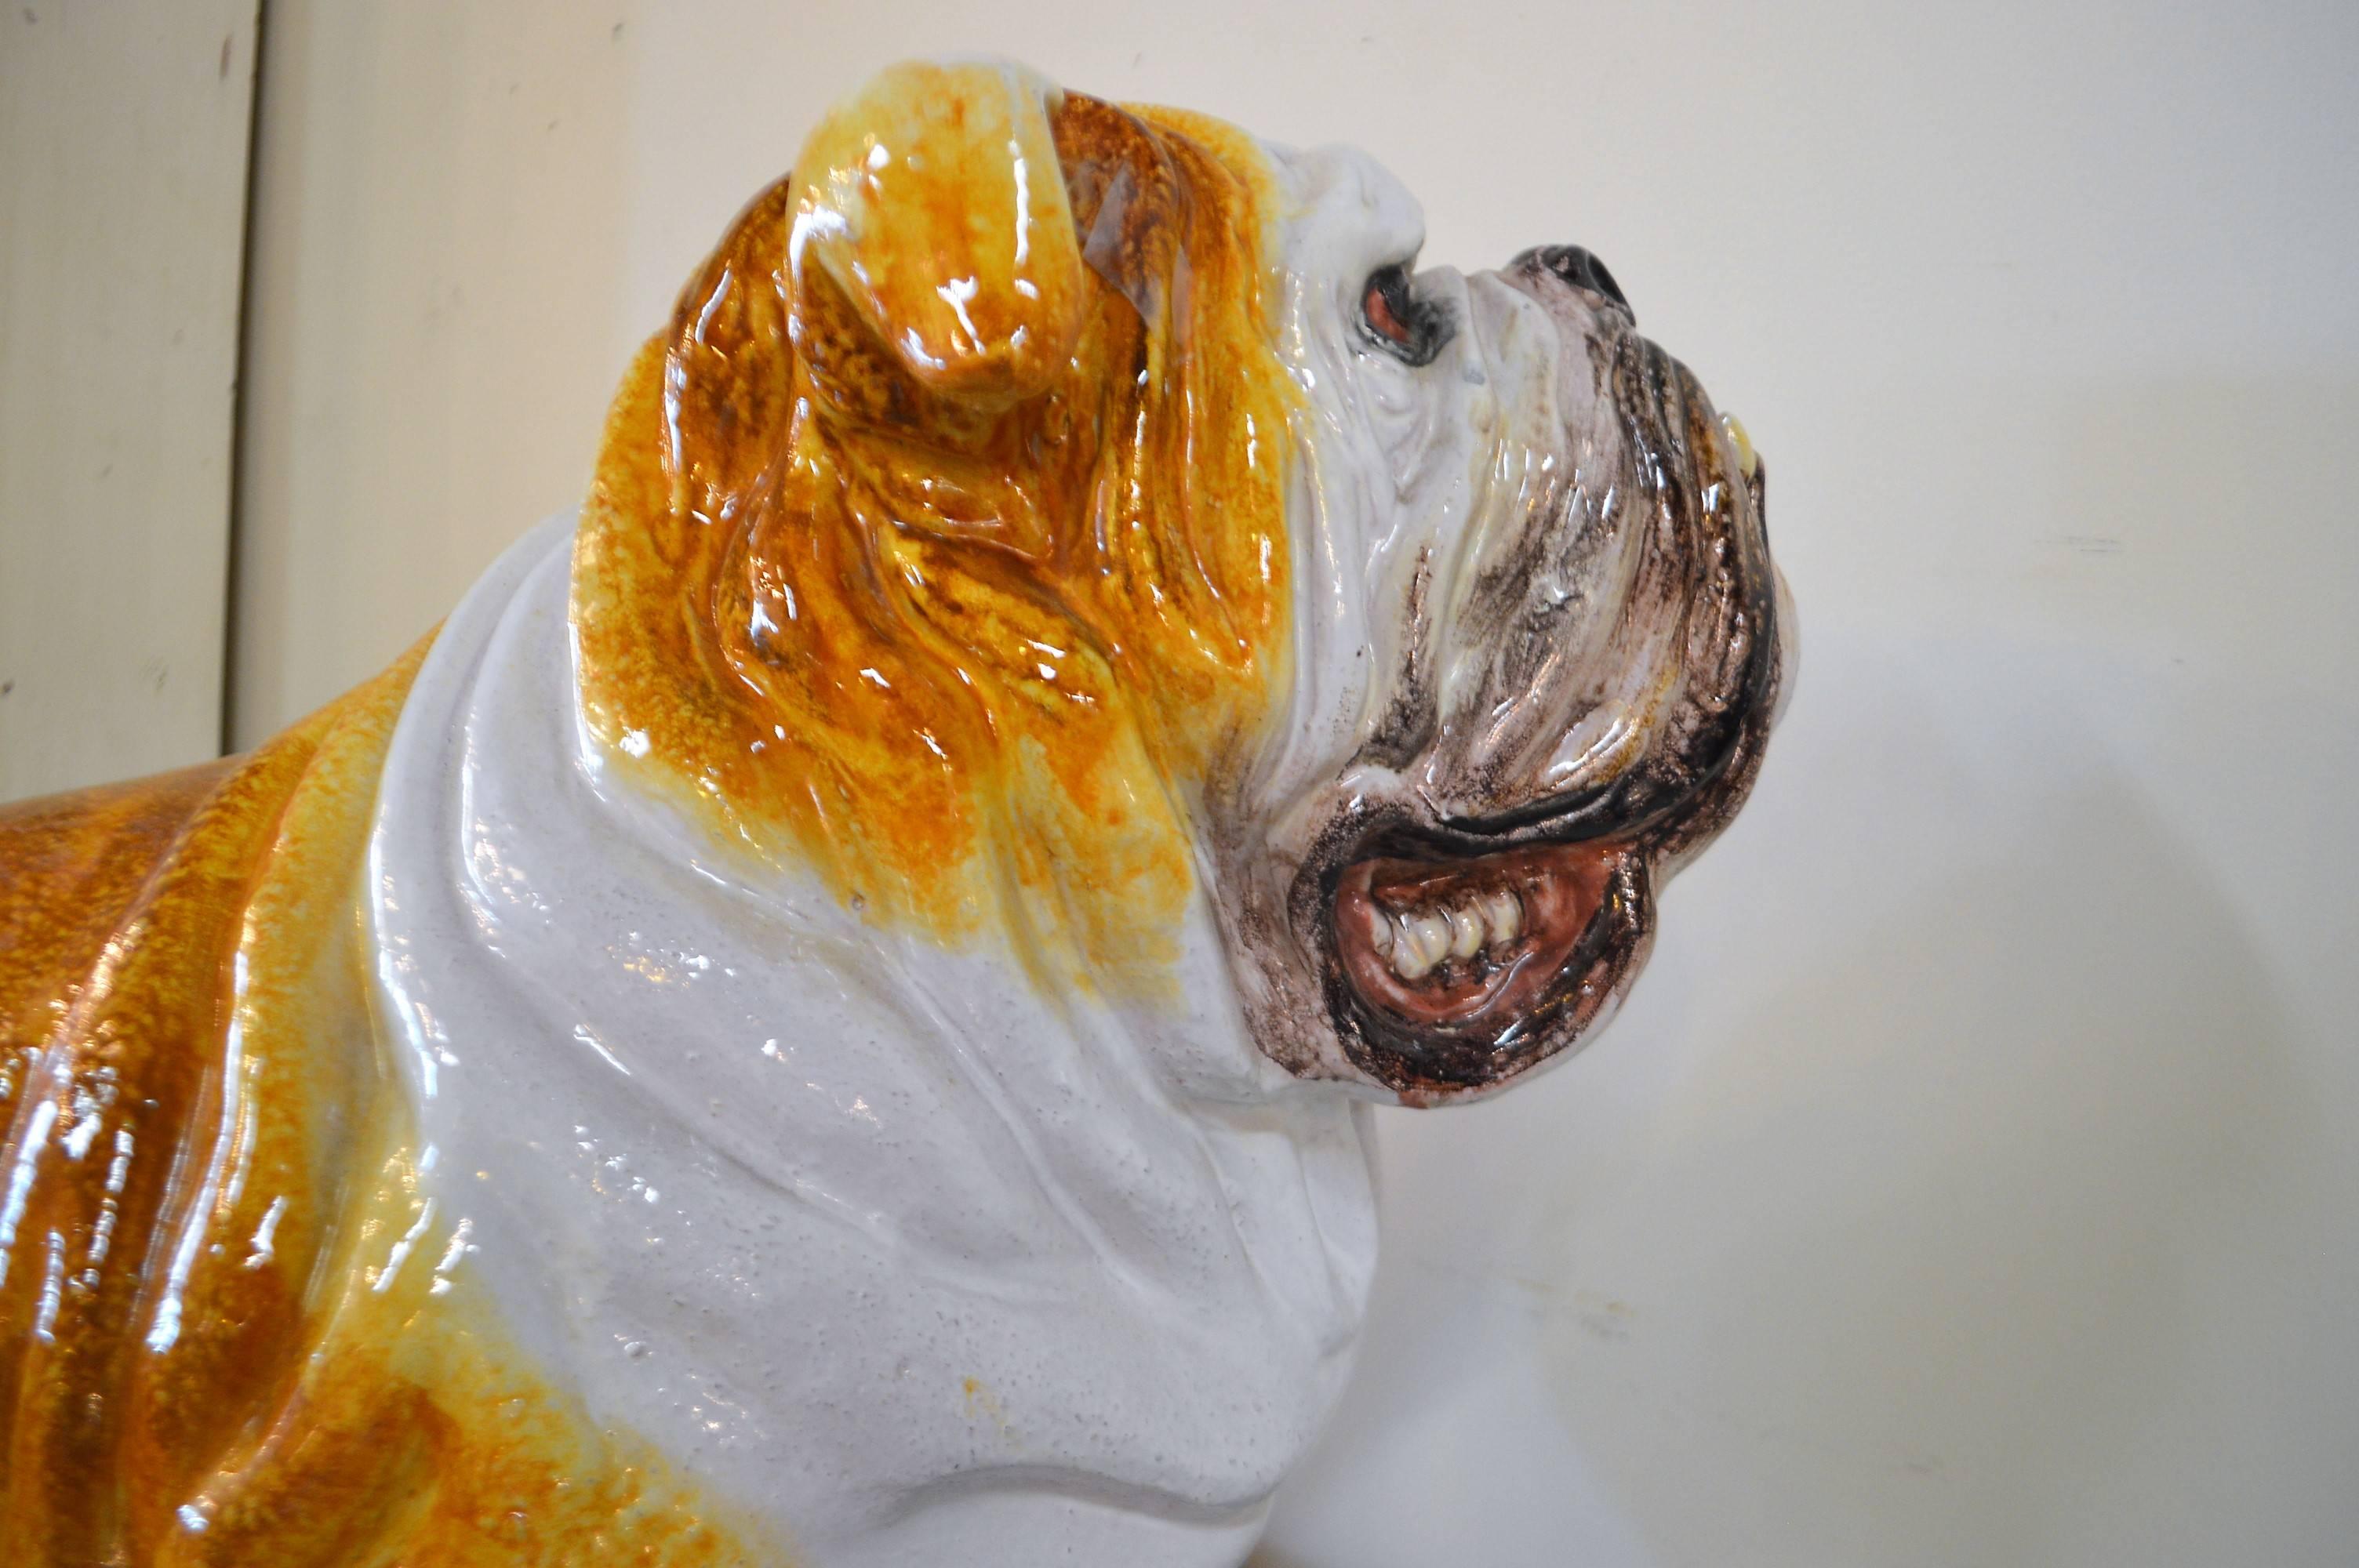 American Craftsman Lifesize Bulldog Made of Terra Cotta and Finished with a Glazed Ceramic